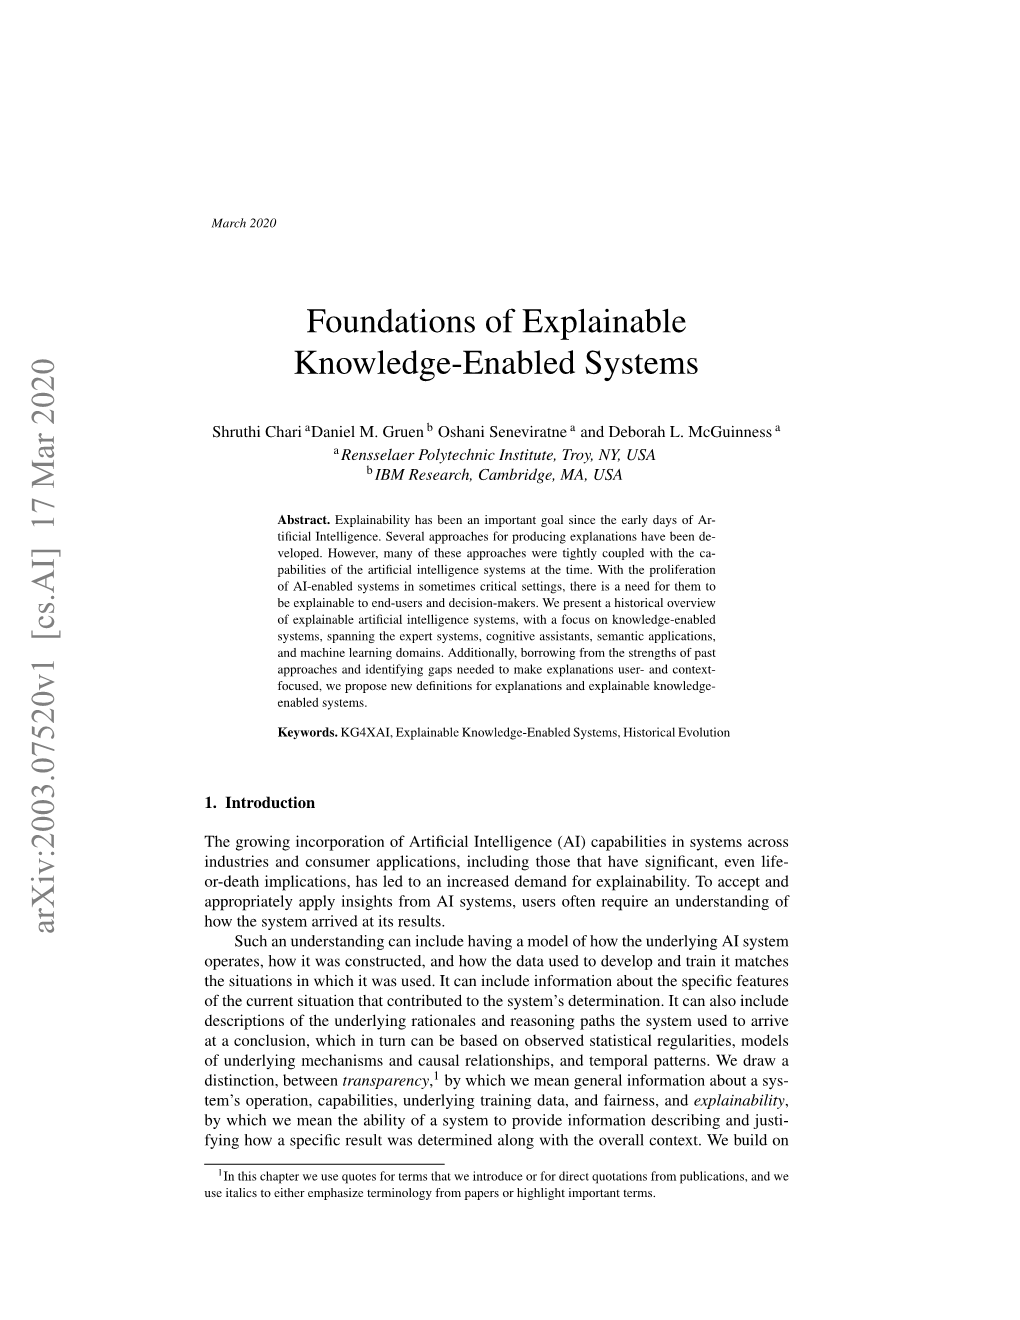 Foundations of Explainable Knowledge-Enabled Systems Arxiv